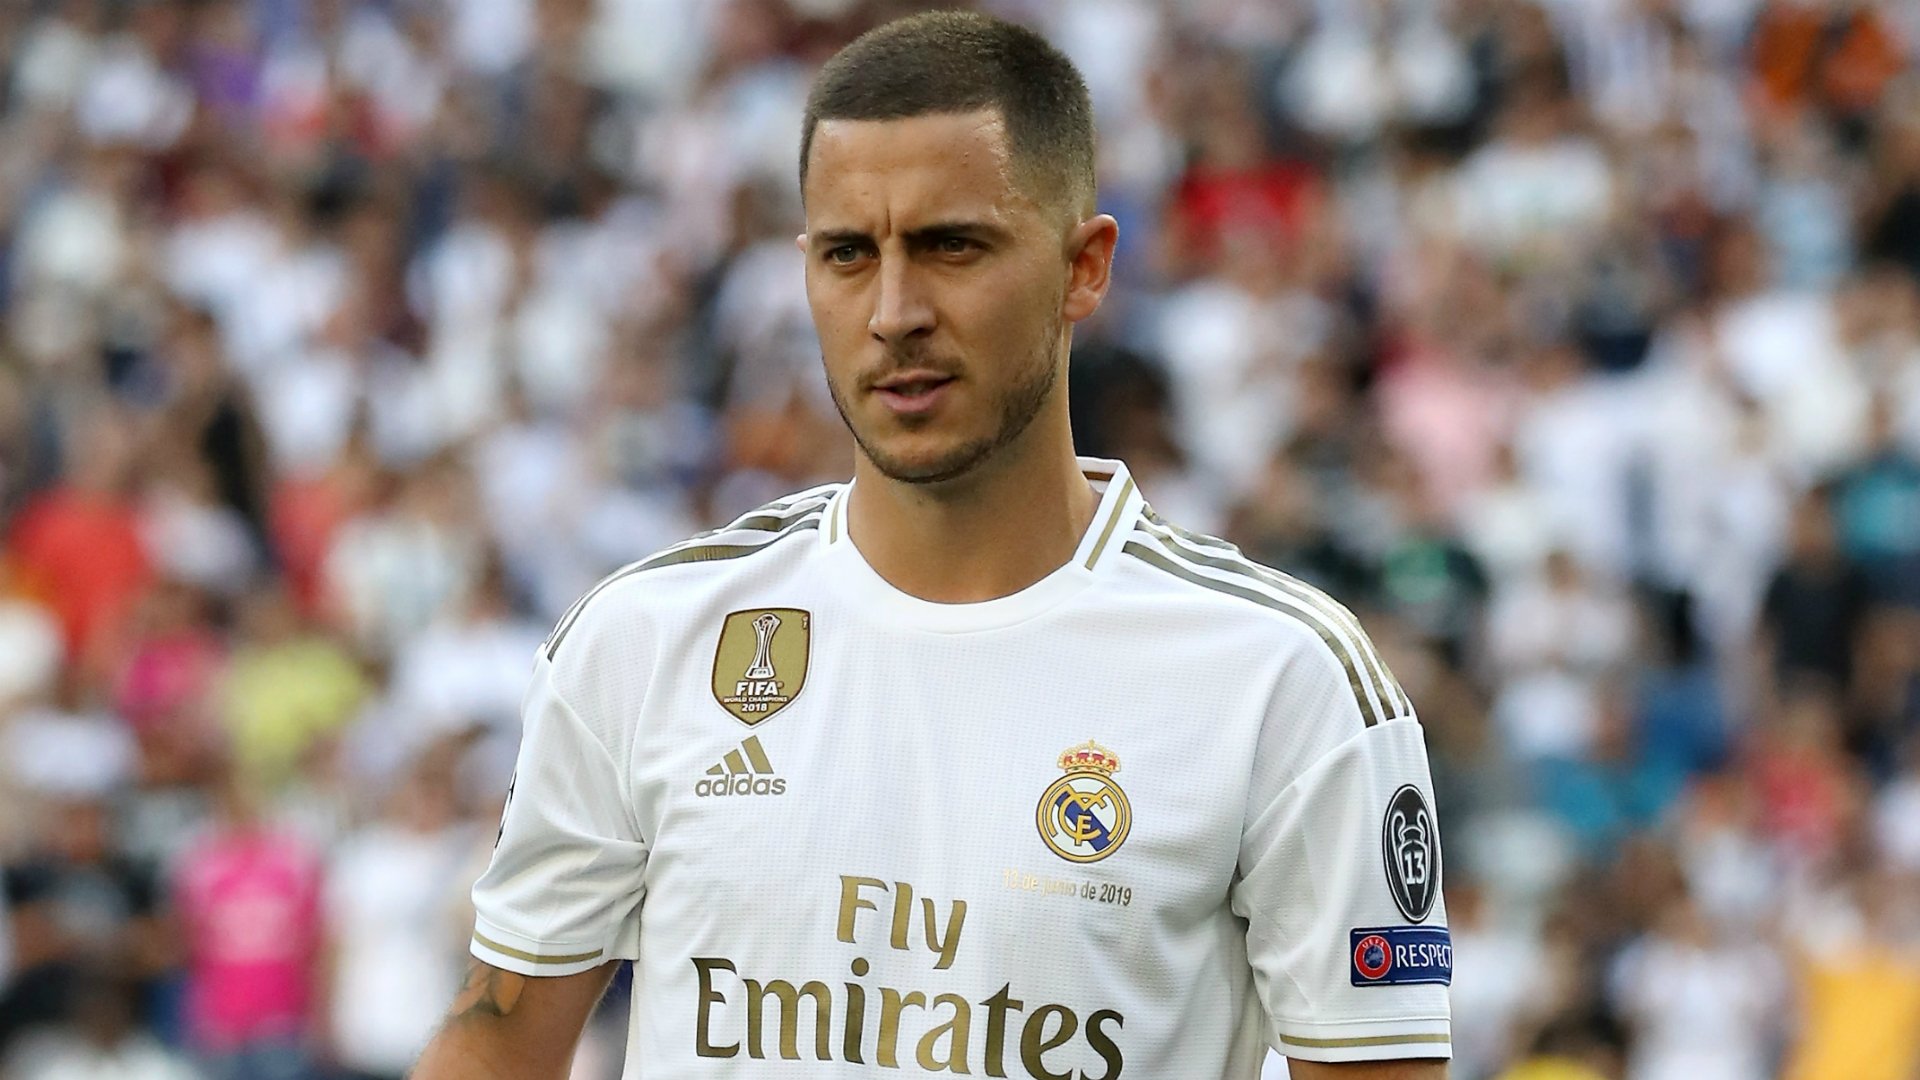 An All Time Legend Joins Hazard As FIFA 20 Cover Star